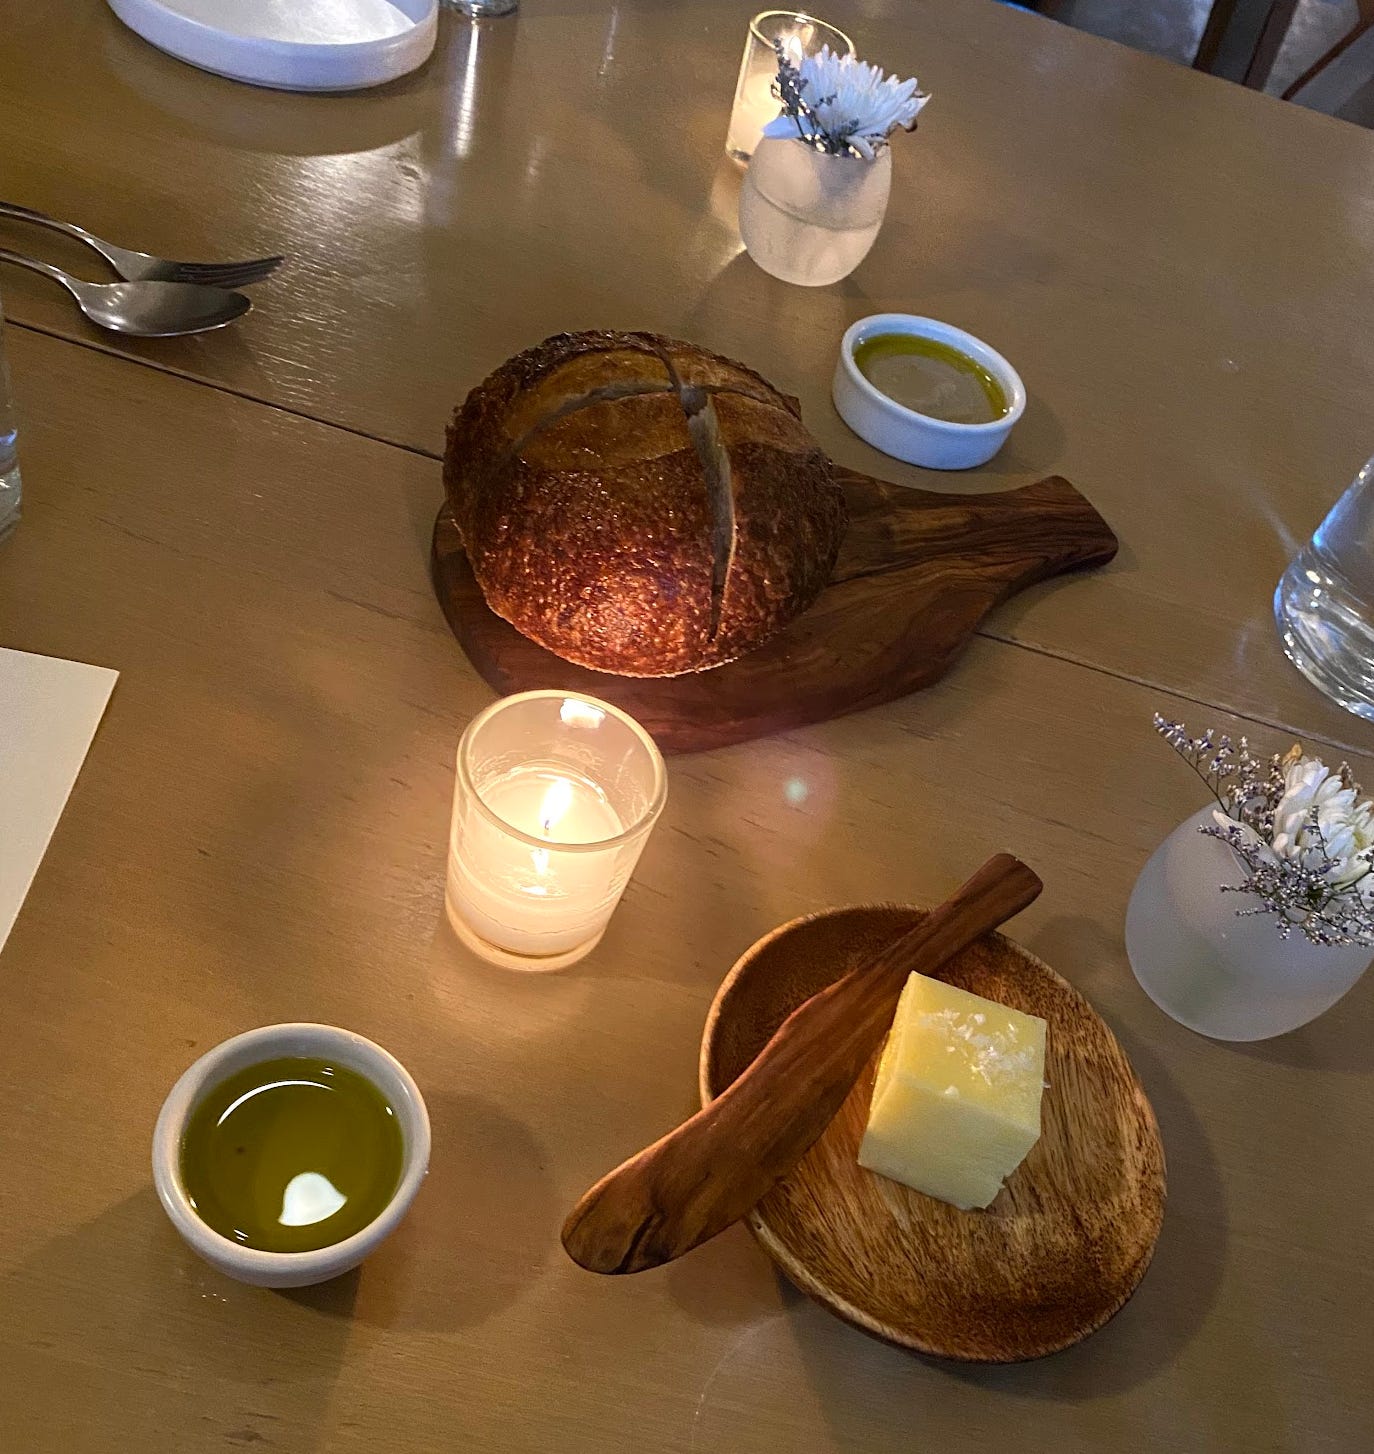 a round brown loaf, cut roughly into quarters, sits on a wooden serving board. next to it is a cube of golden butter, flecked with salt. the table is lit by two tiny candles, reflected in a small dish of olive oil. two tiny cups hold one white chrysanthemum (i think) each. 